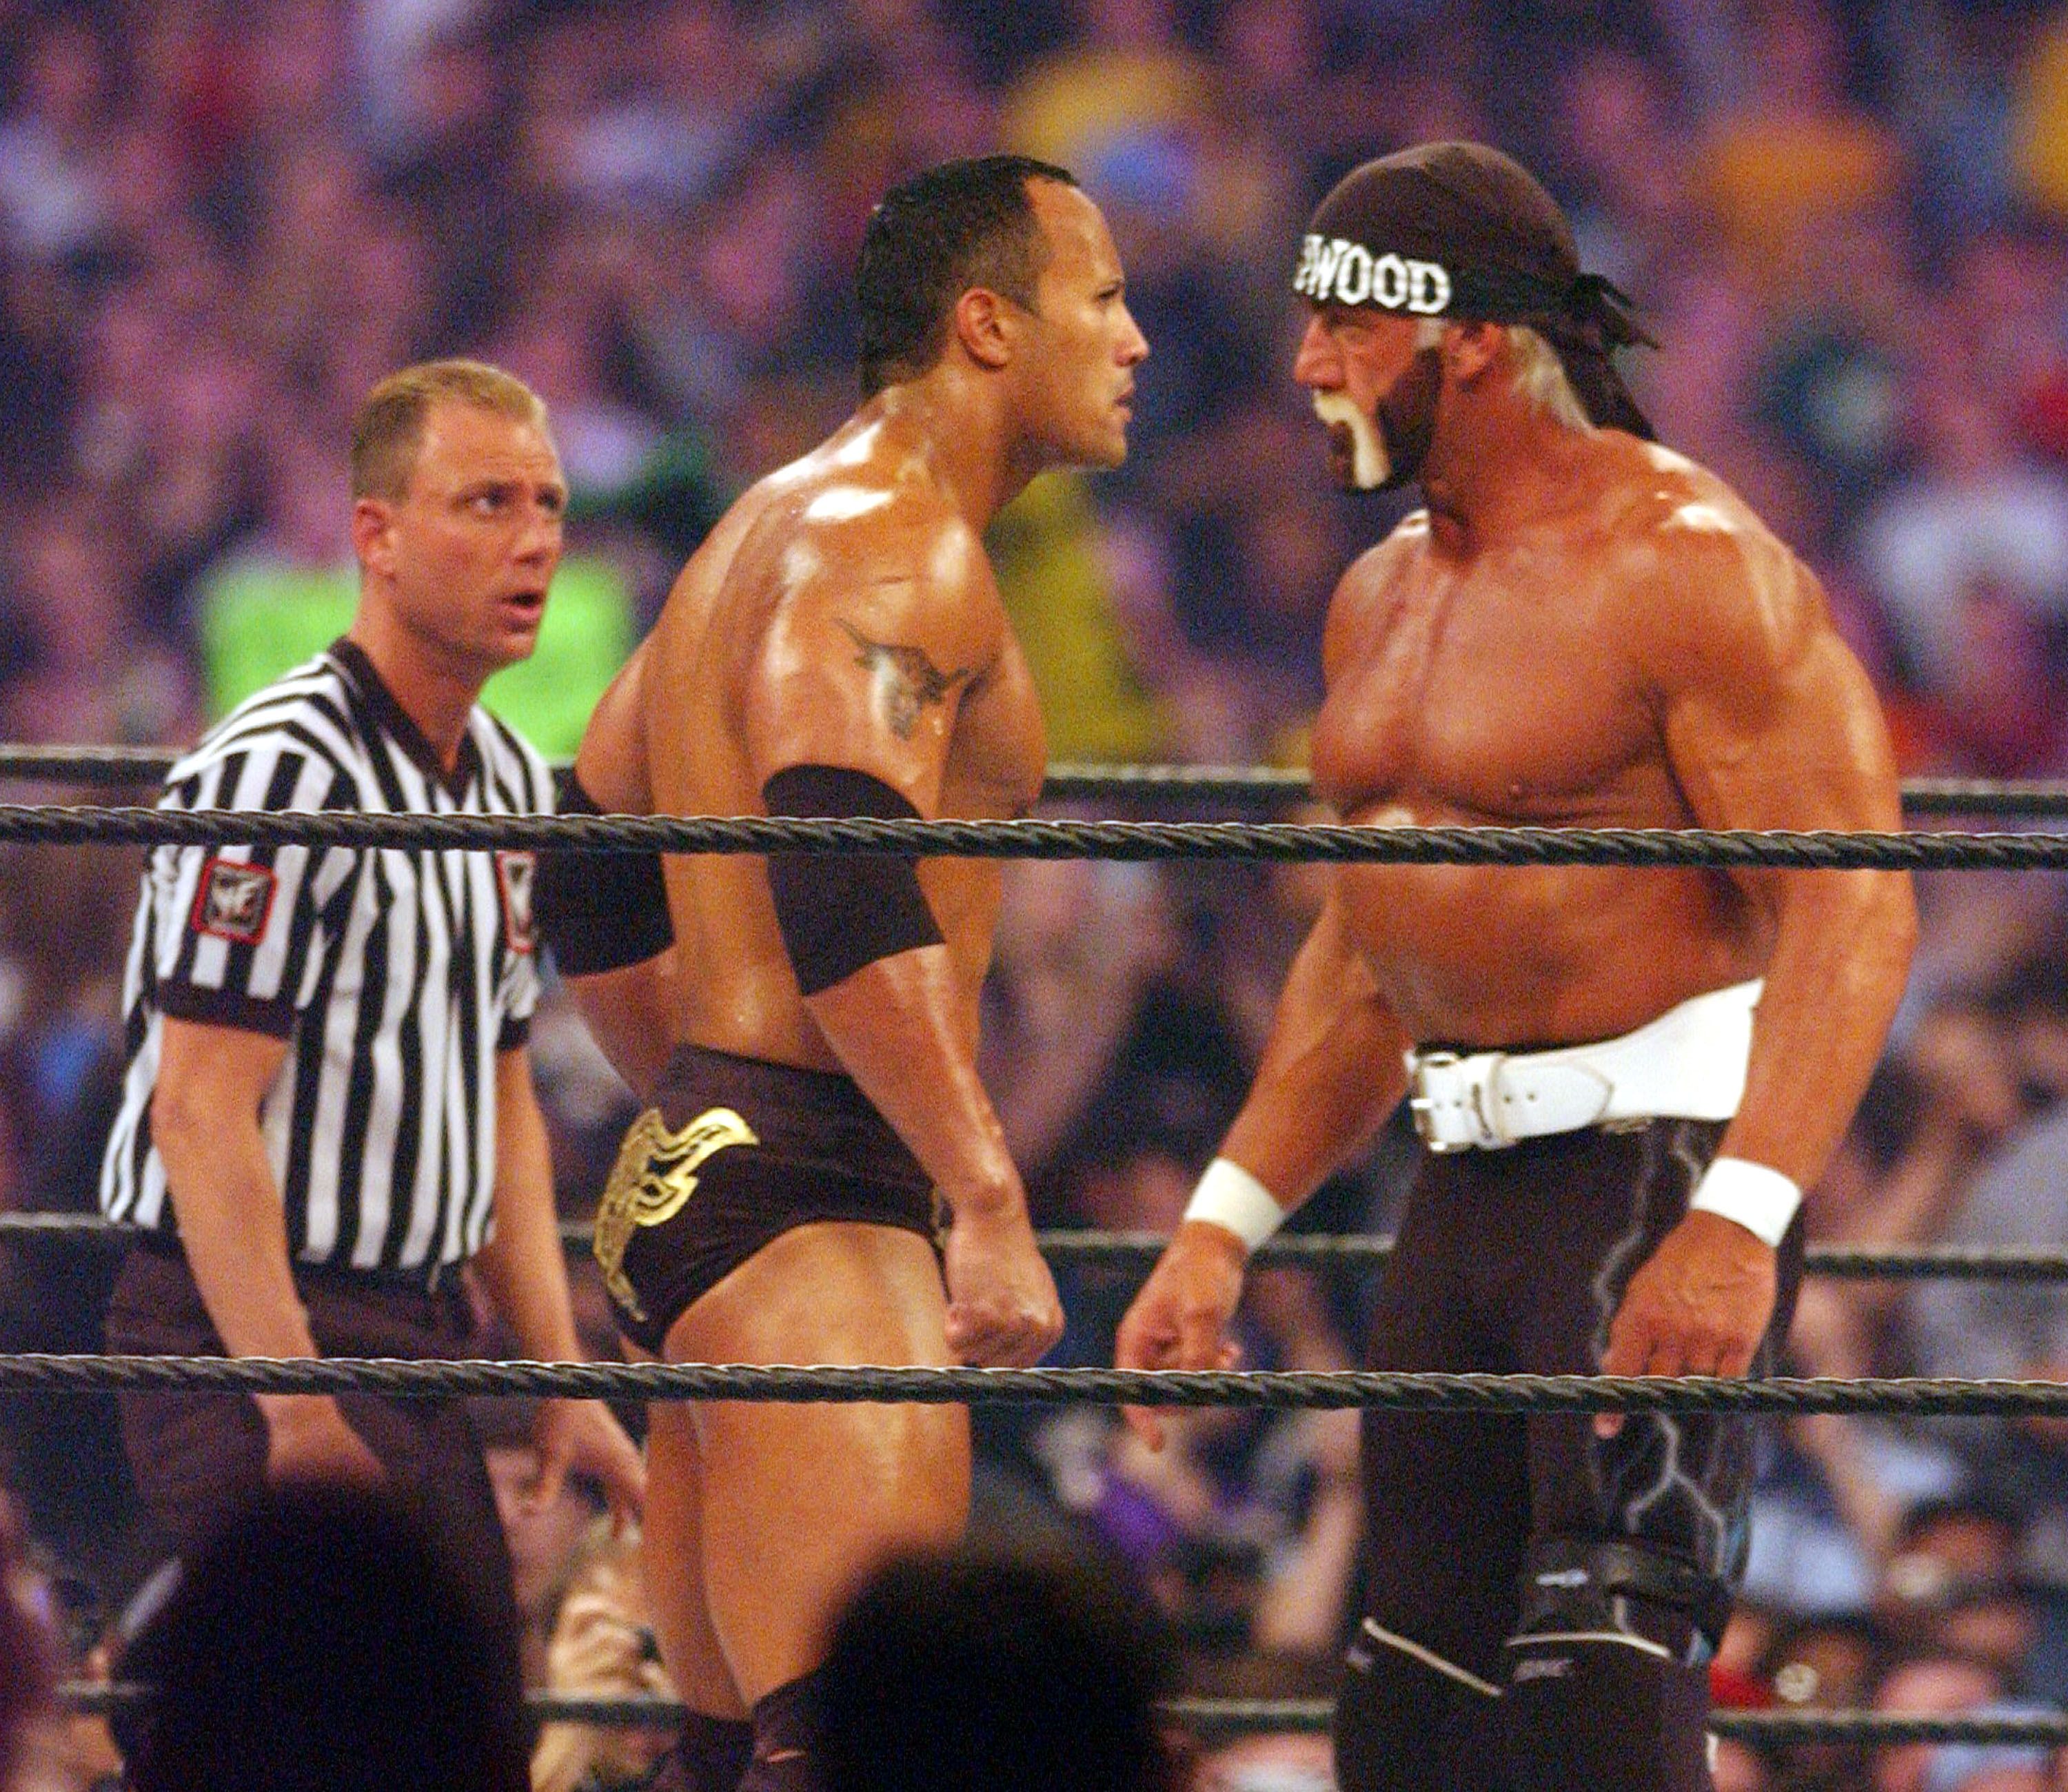 The Rock and Hollywood Hogan face off in a ring. 